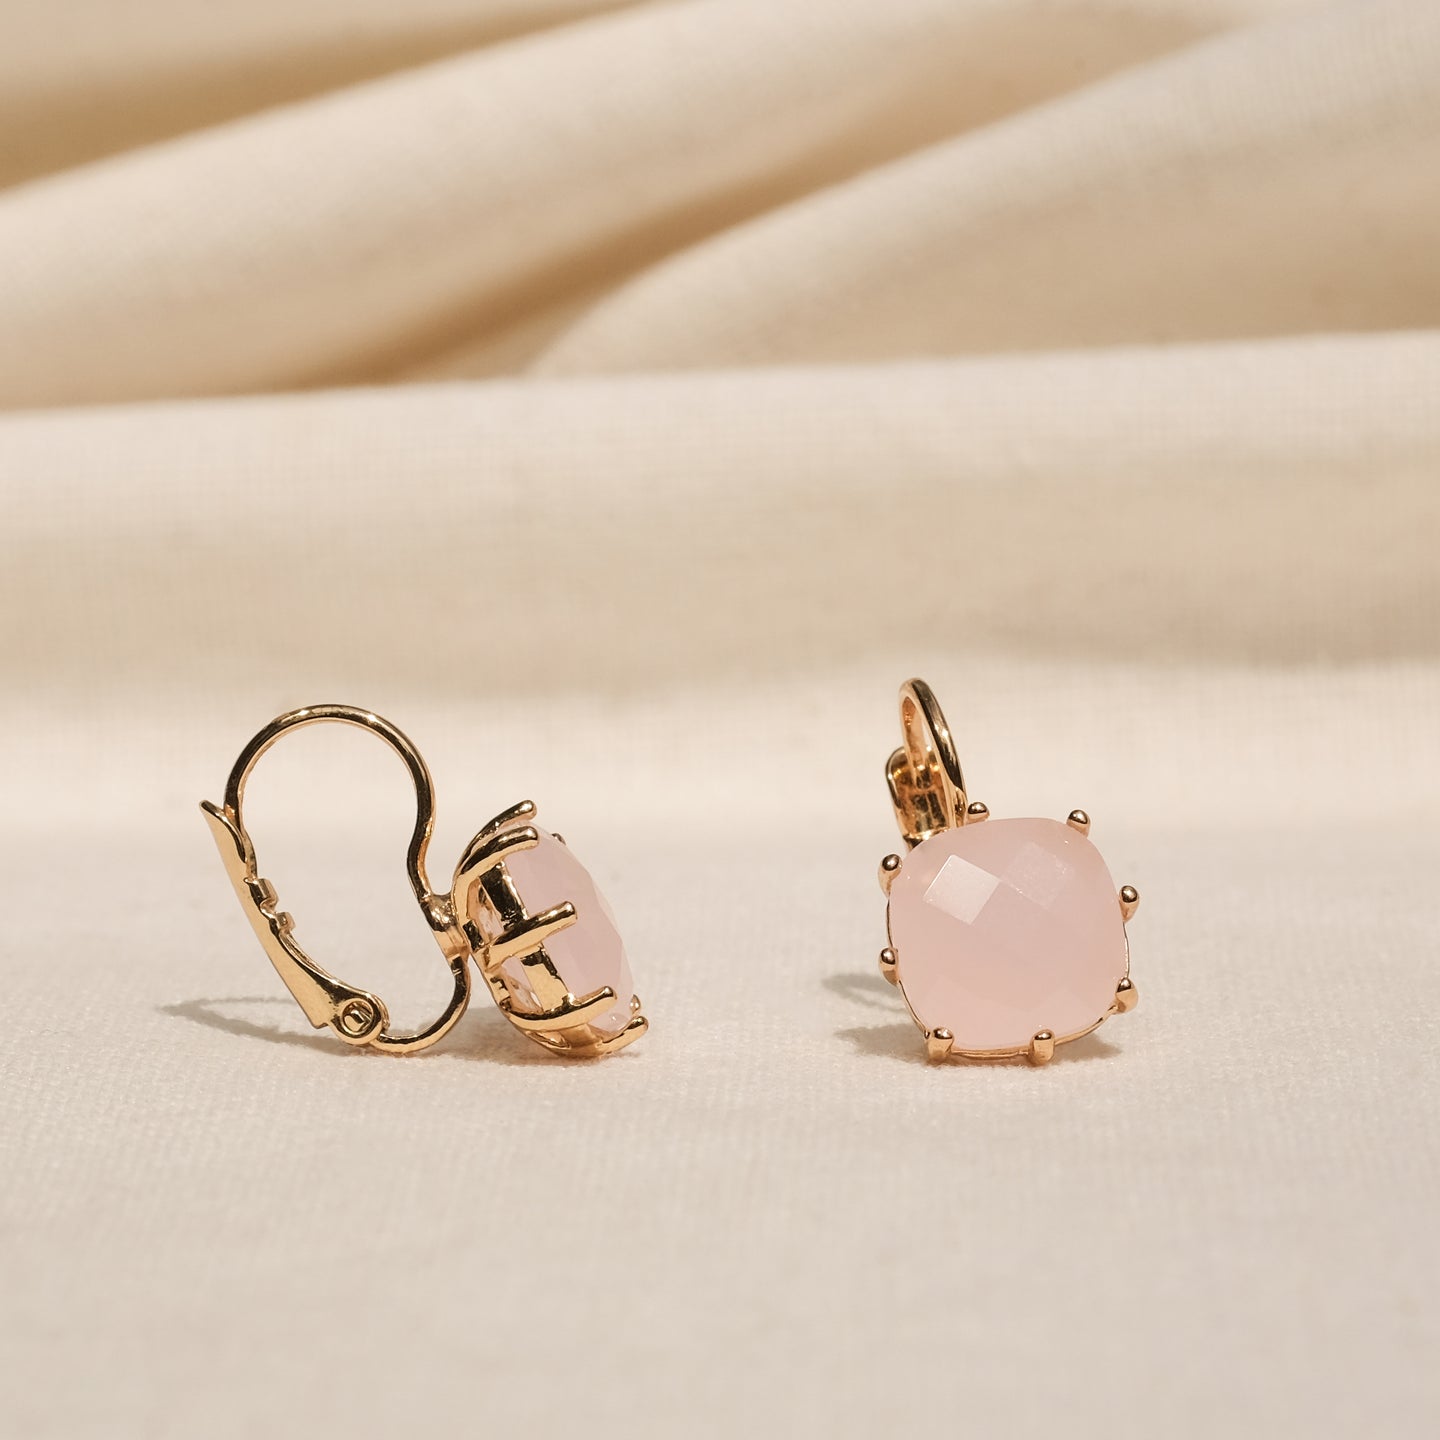 products/eula-cz-earrings-18k-gold-plated-brass-blush-stone-1.jpg